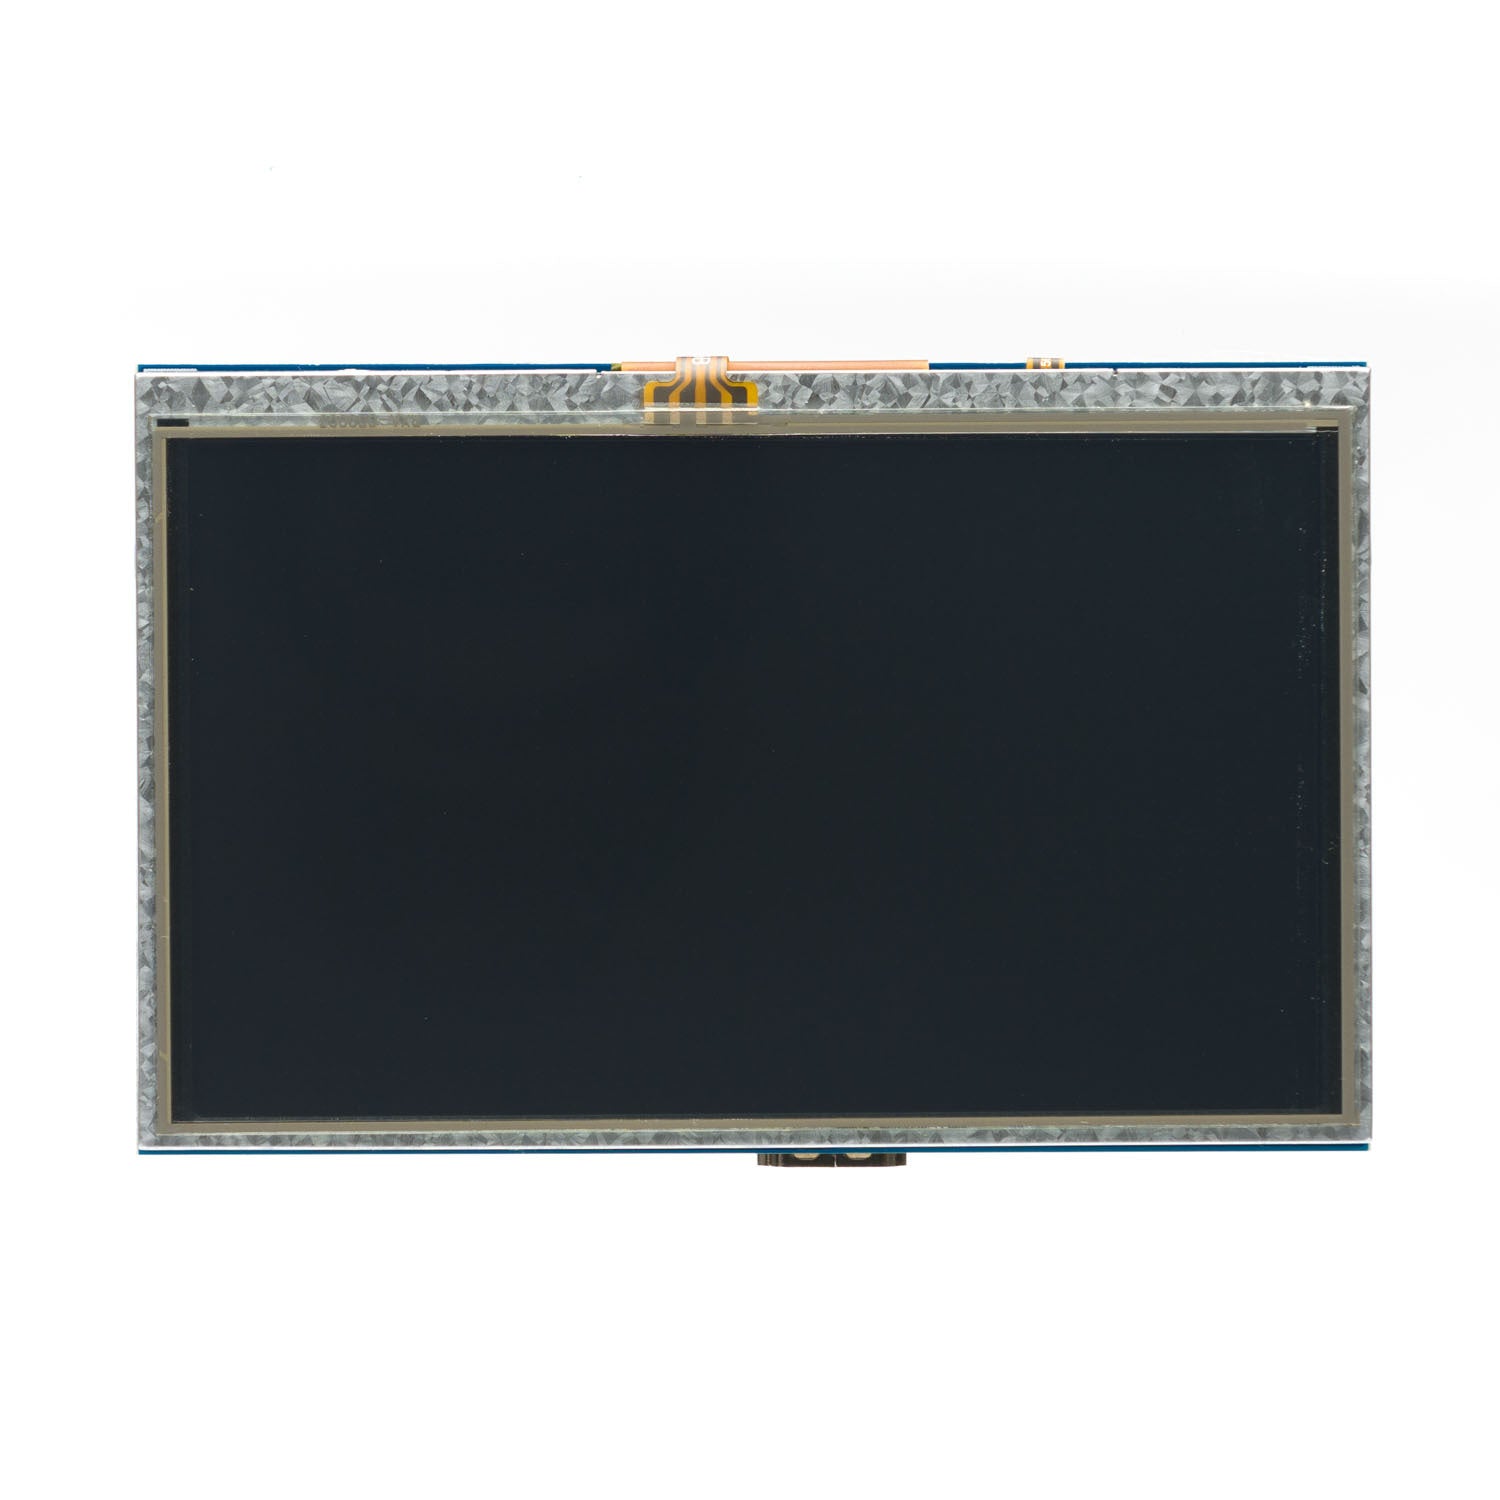 5 inch LCD HDMI Touch Screen Display for Raspberry Pi 4